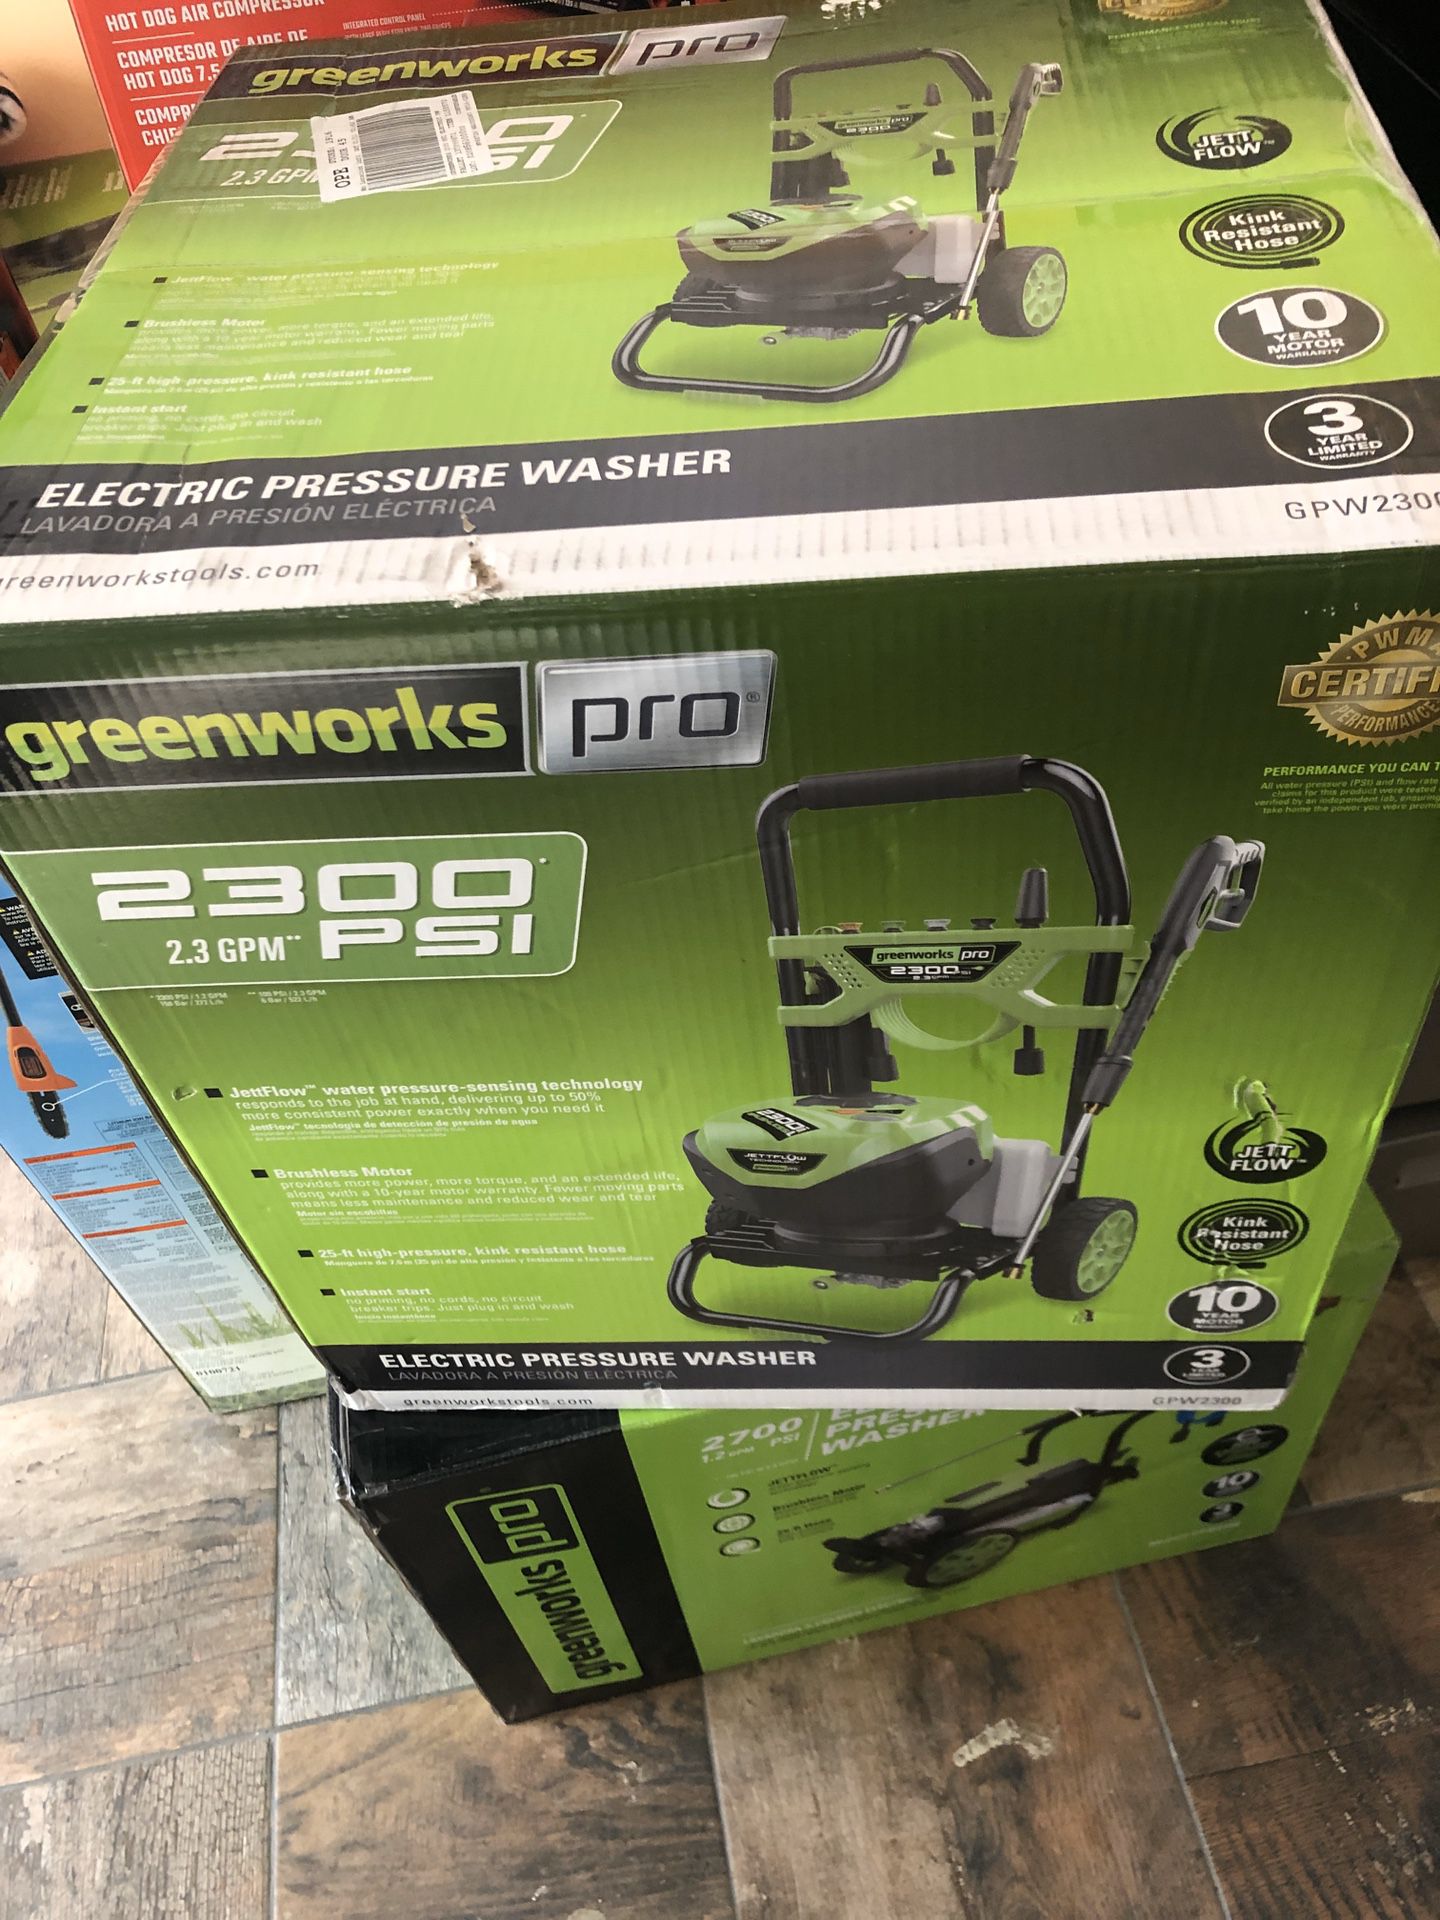 GREENWORKS 2300 PSI 2.3 GPM ELECTRIC PRESSURE WASH RETAILS FOR $299.99